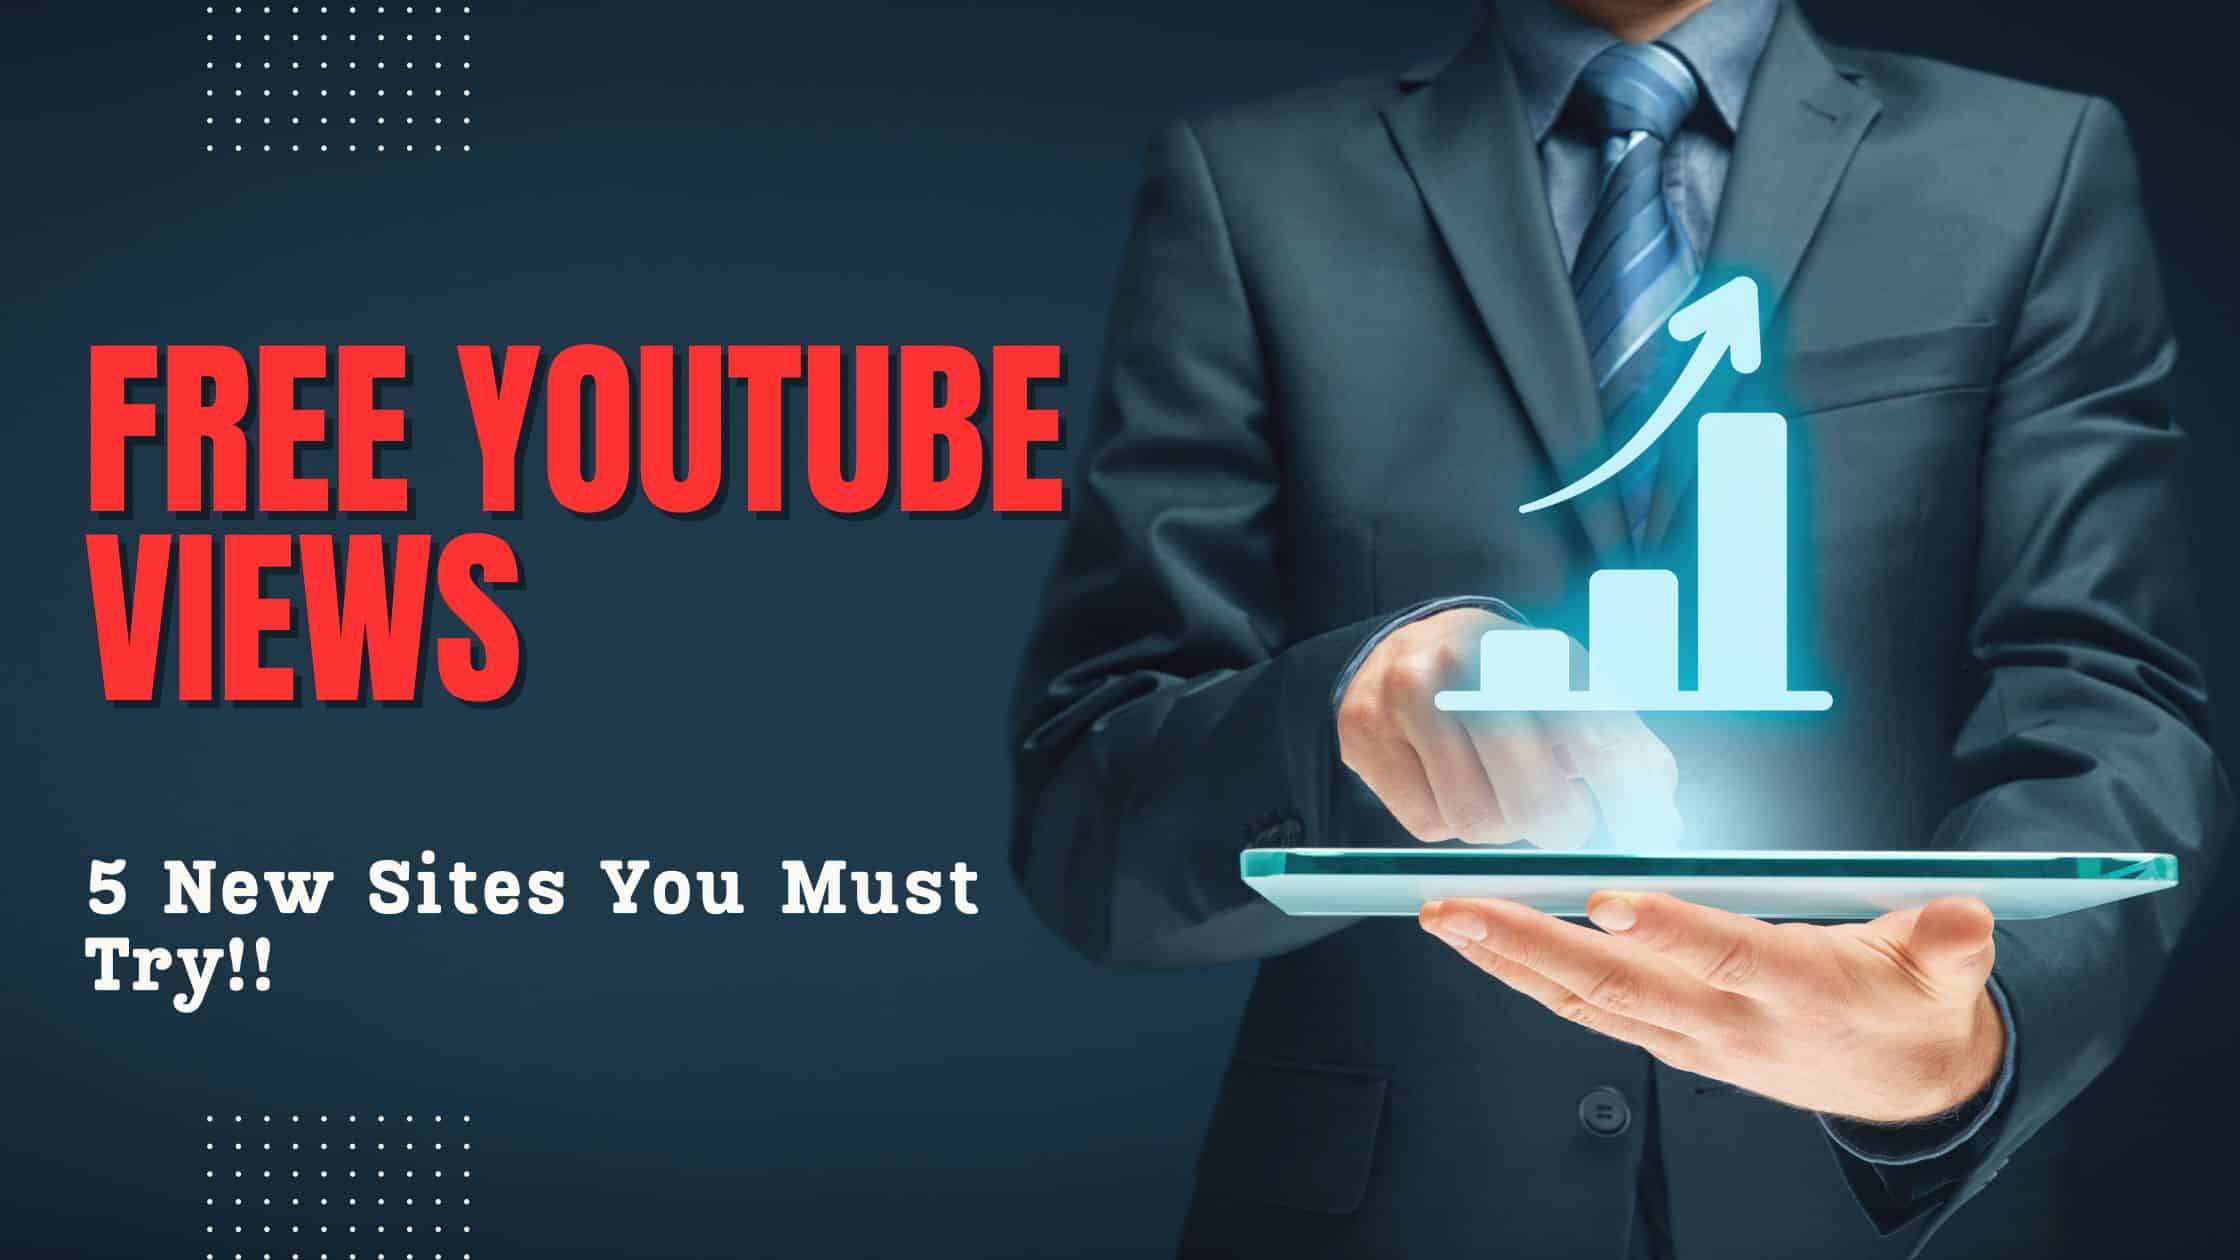 Free YouTube Views: 5 New Sites To Try